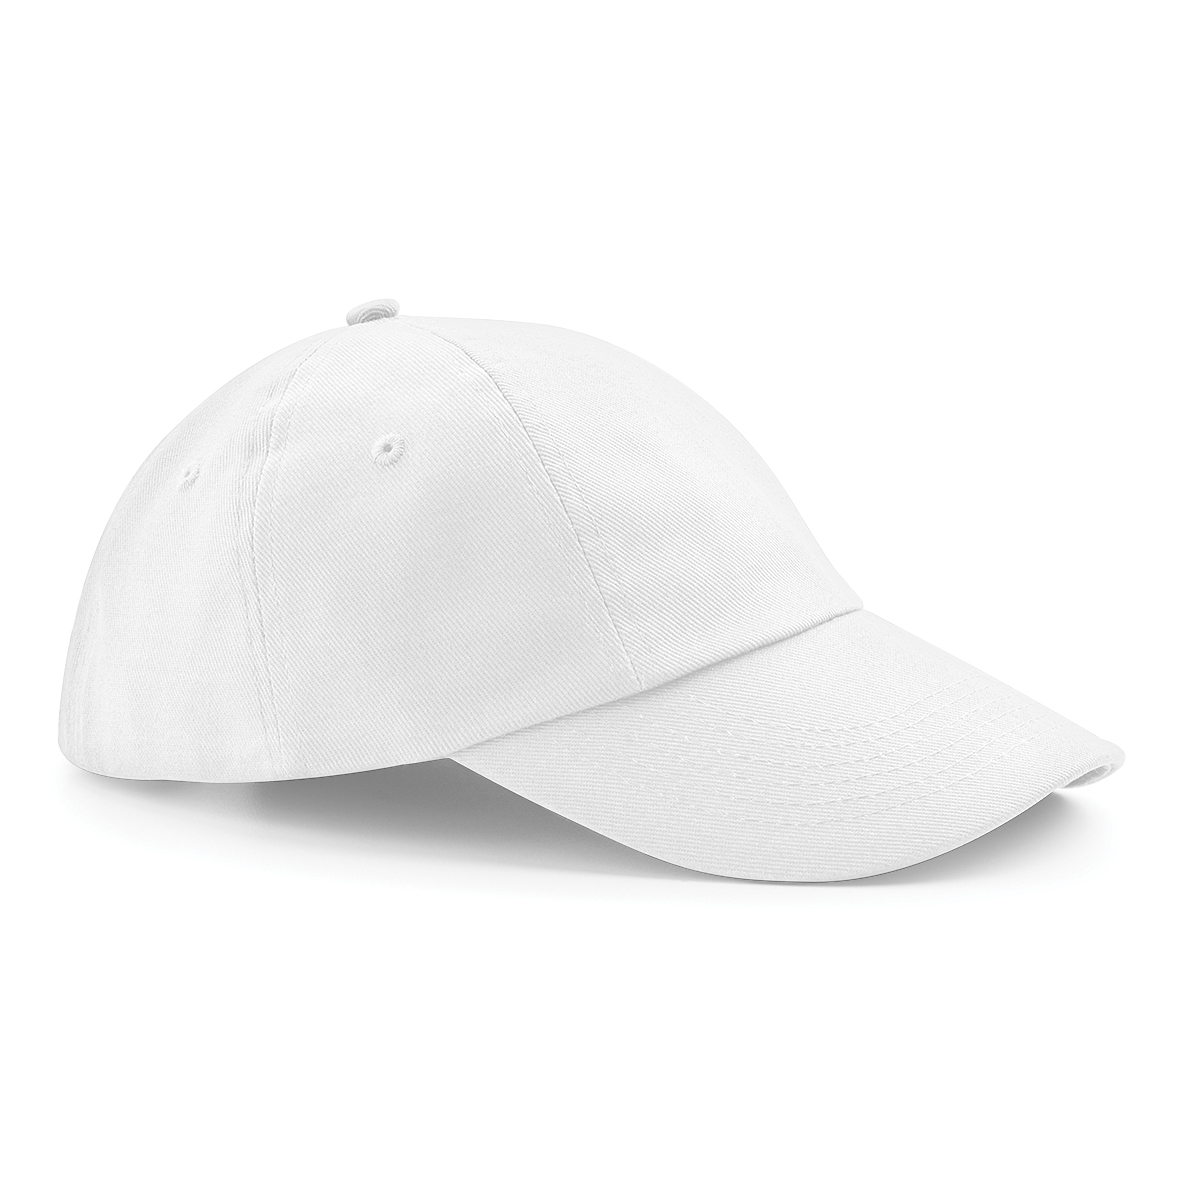 Low Profile Cap in white with seamless, centralised front panel